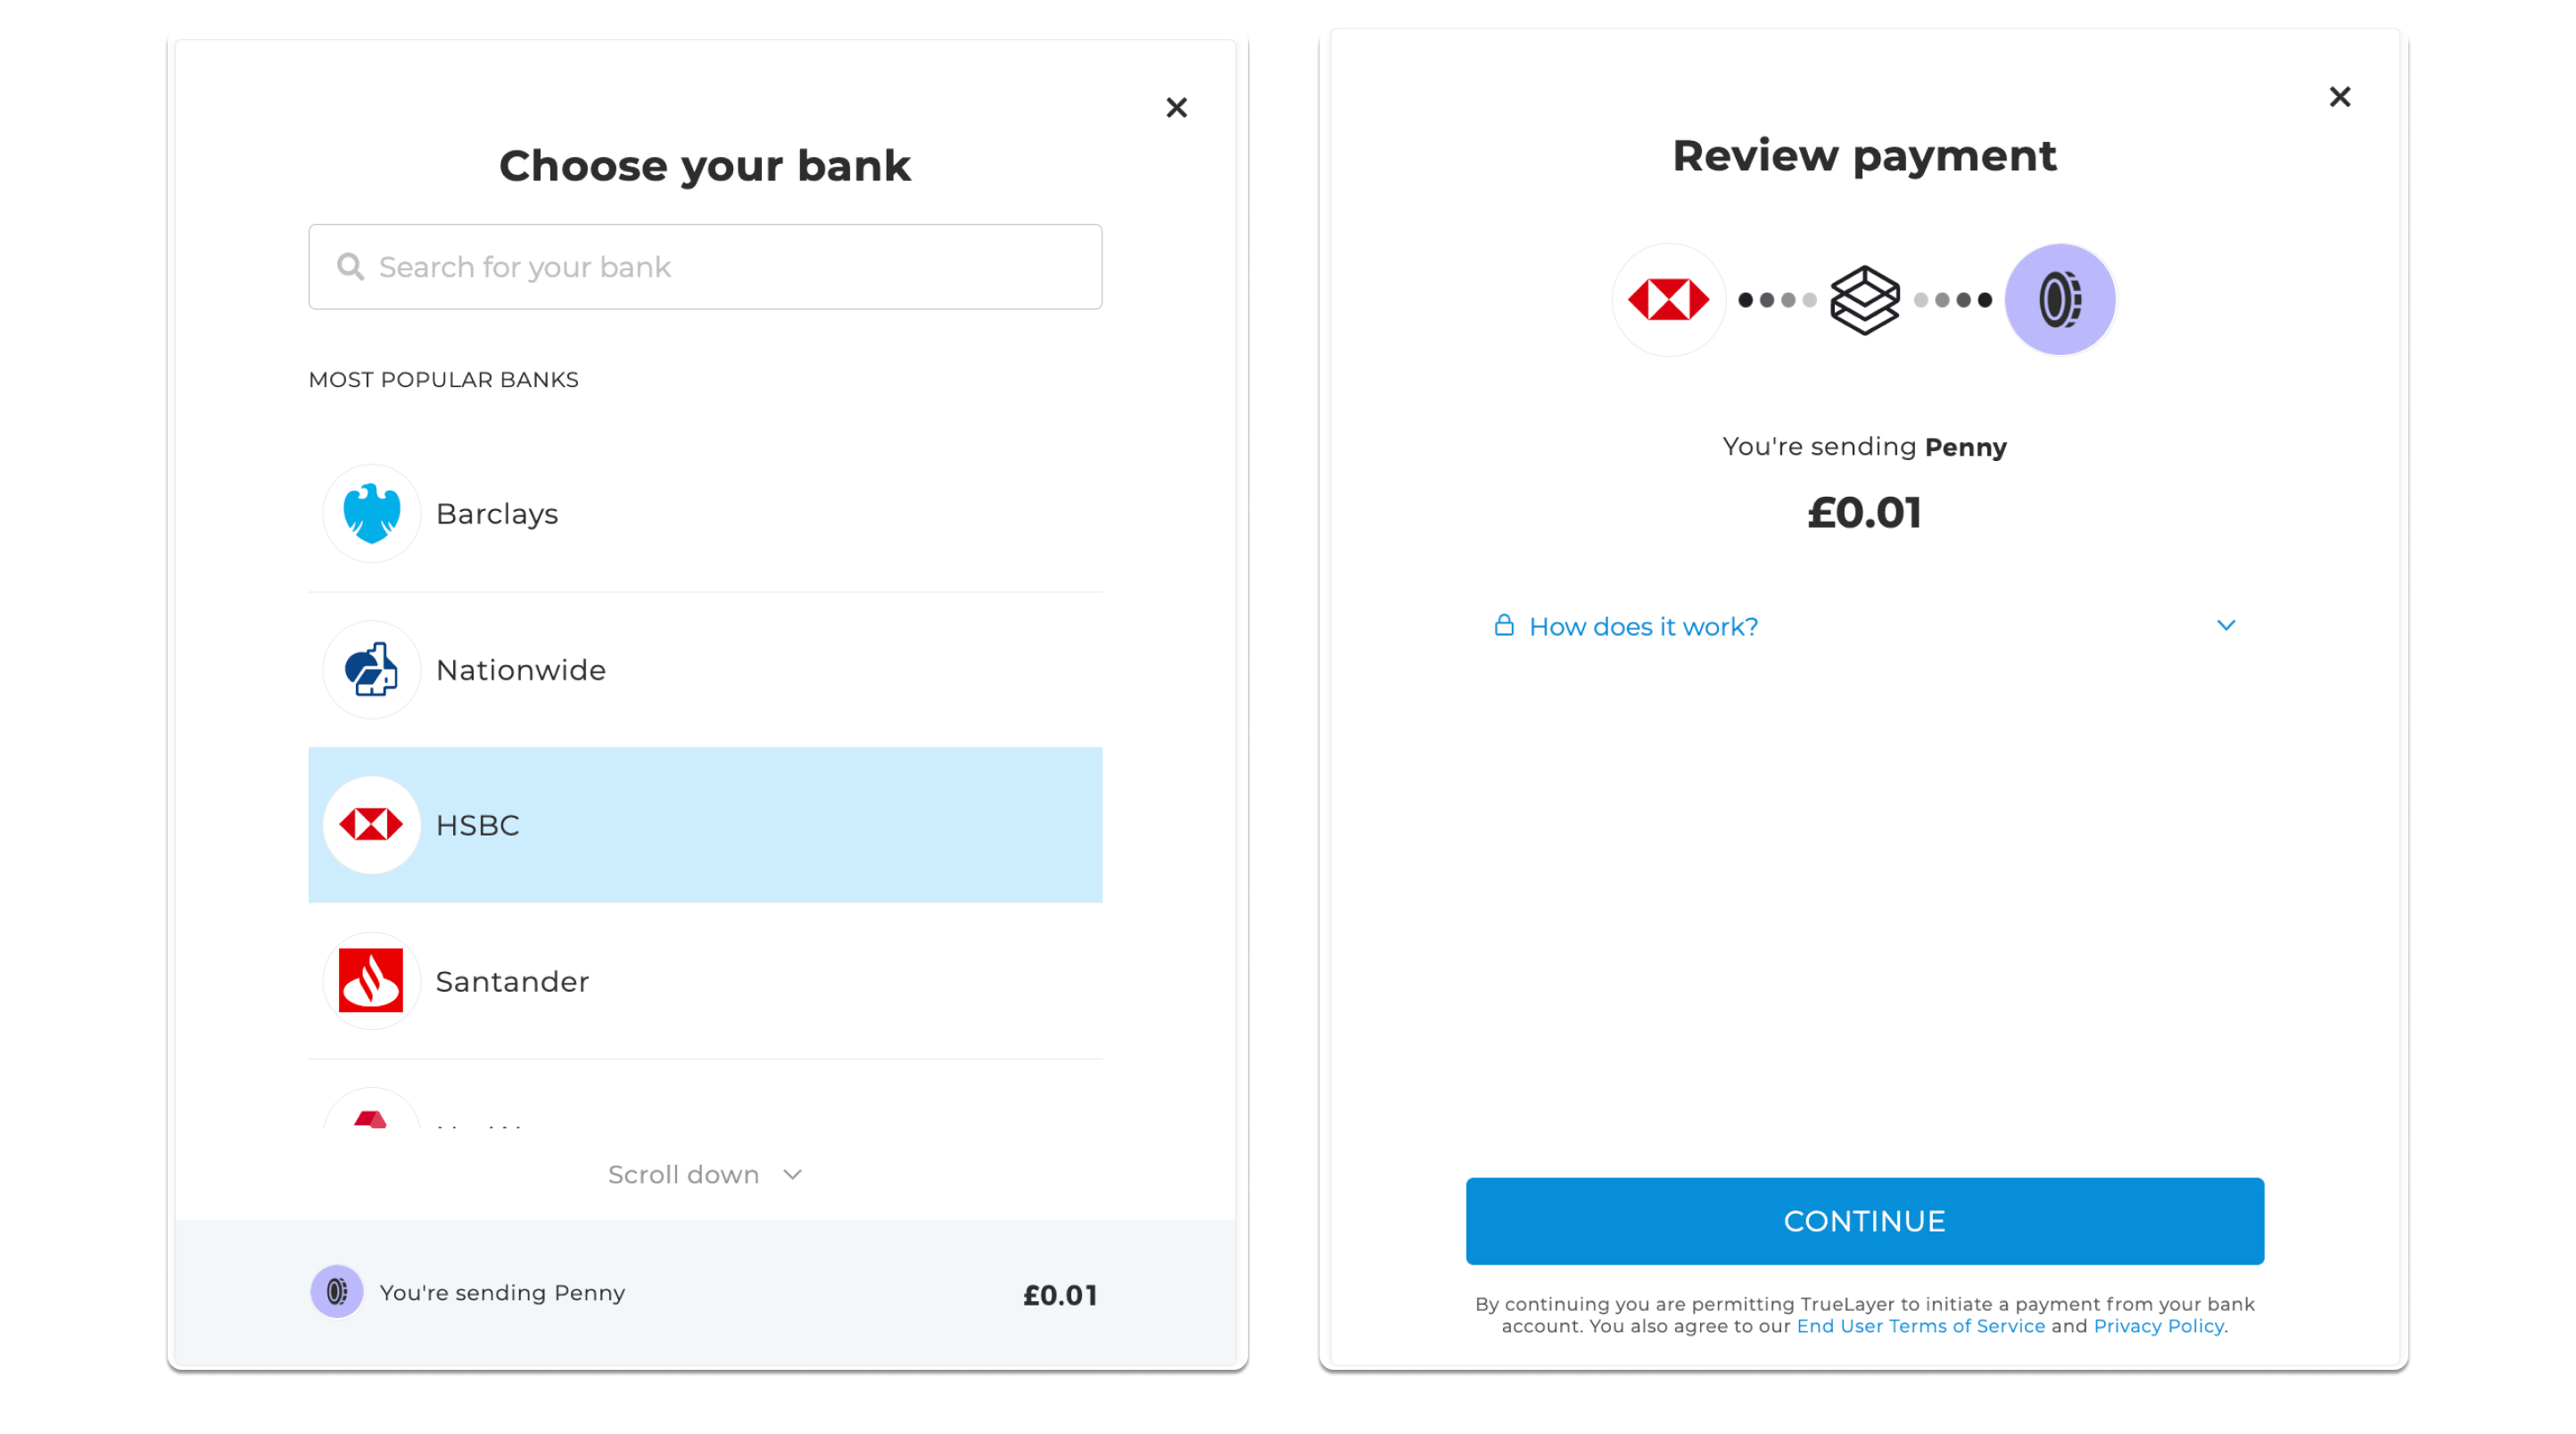 Image showing what the HPP interface looks like. There are two screenshots in the image, one showing the bank selection screen and the other showing the payment confirmation screen.